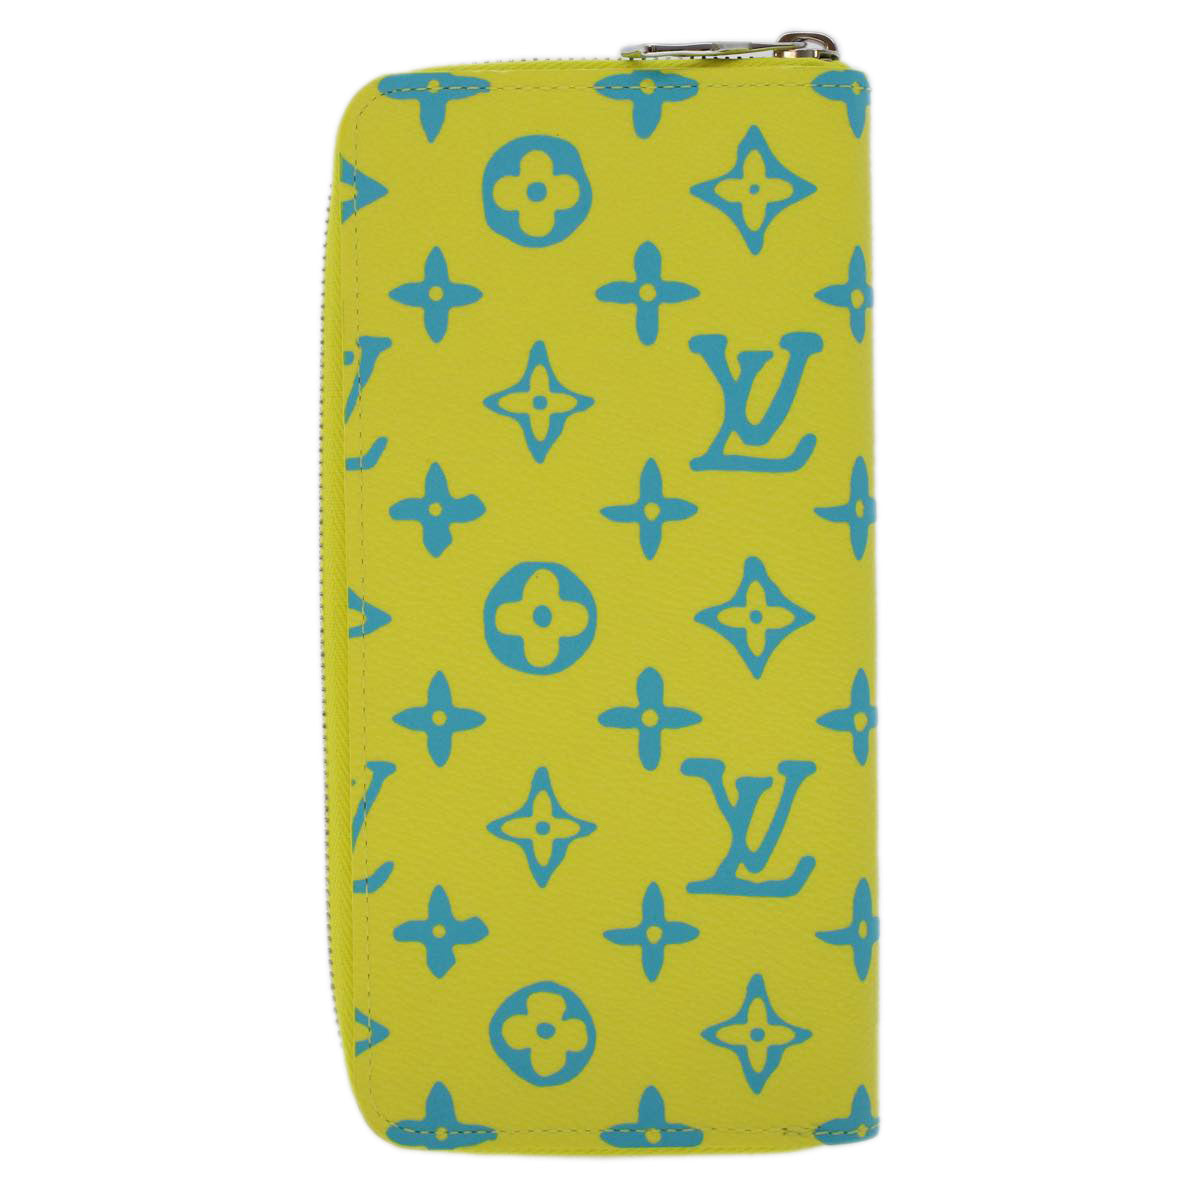 LOUIS VUITTON Playground Zippy Wallet Vertical Wallet Yellow M82005 Auth 48507A - 0